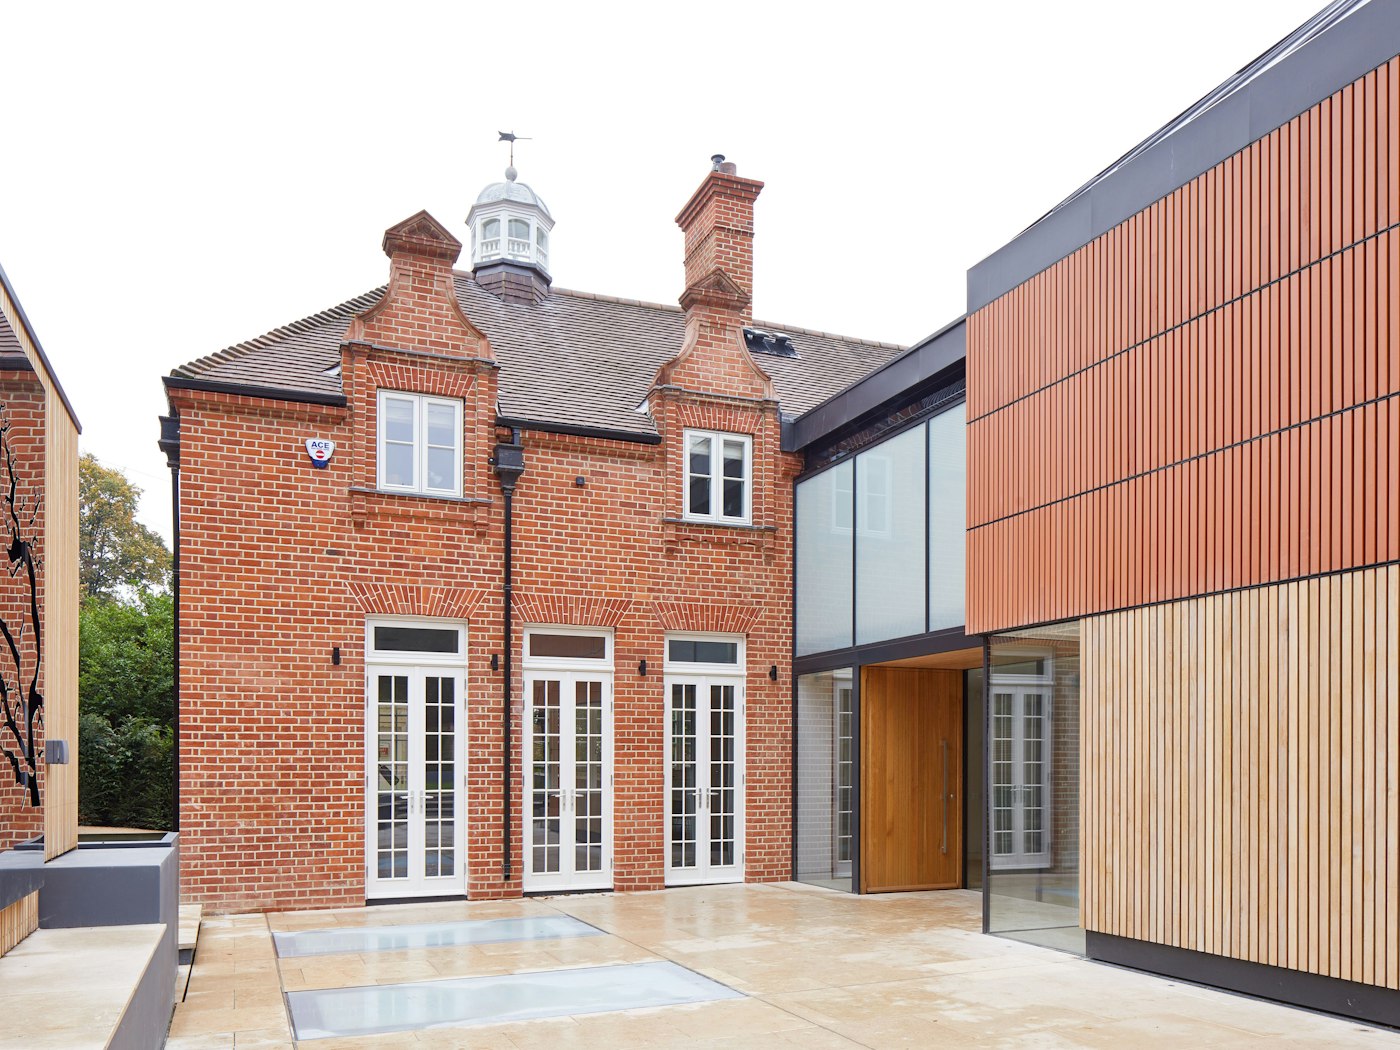 This traditional London house had a contemporary extension built